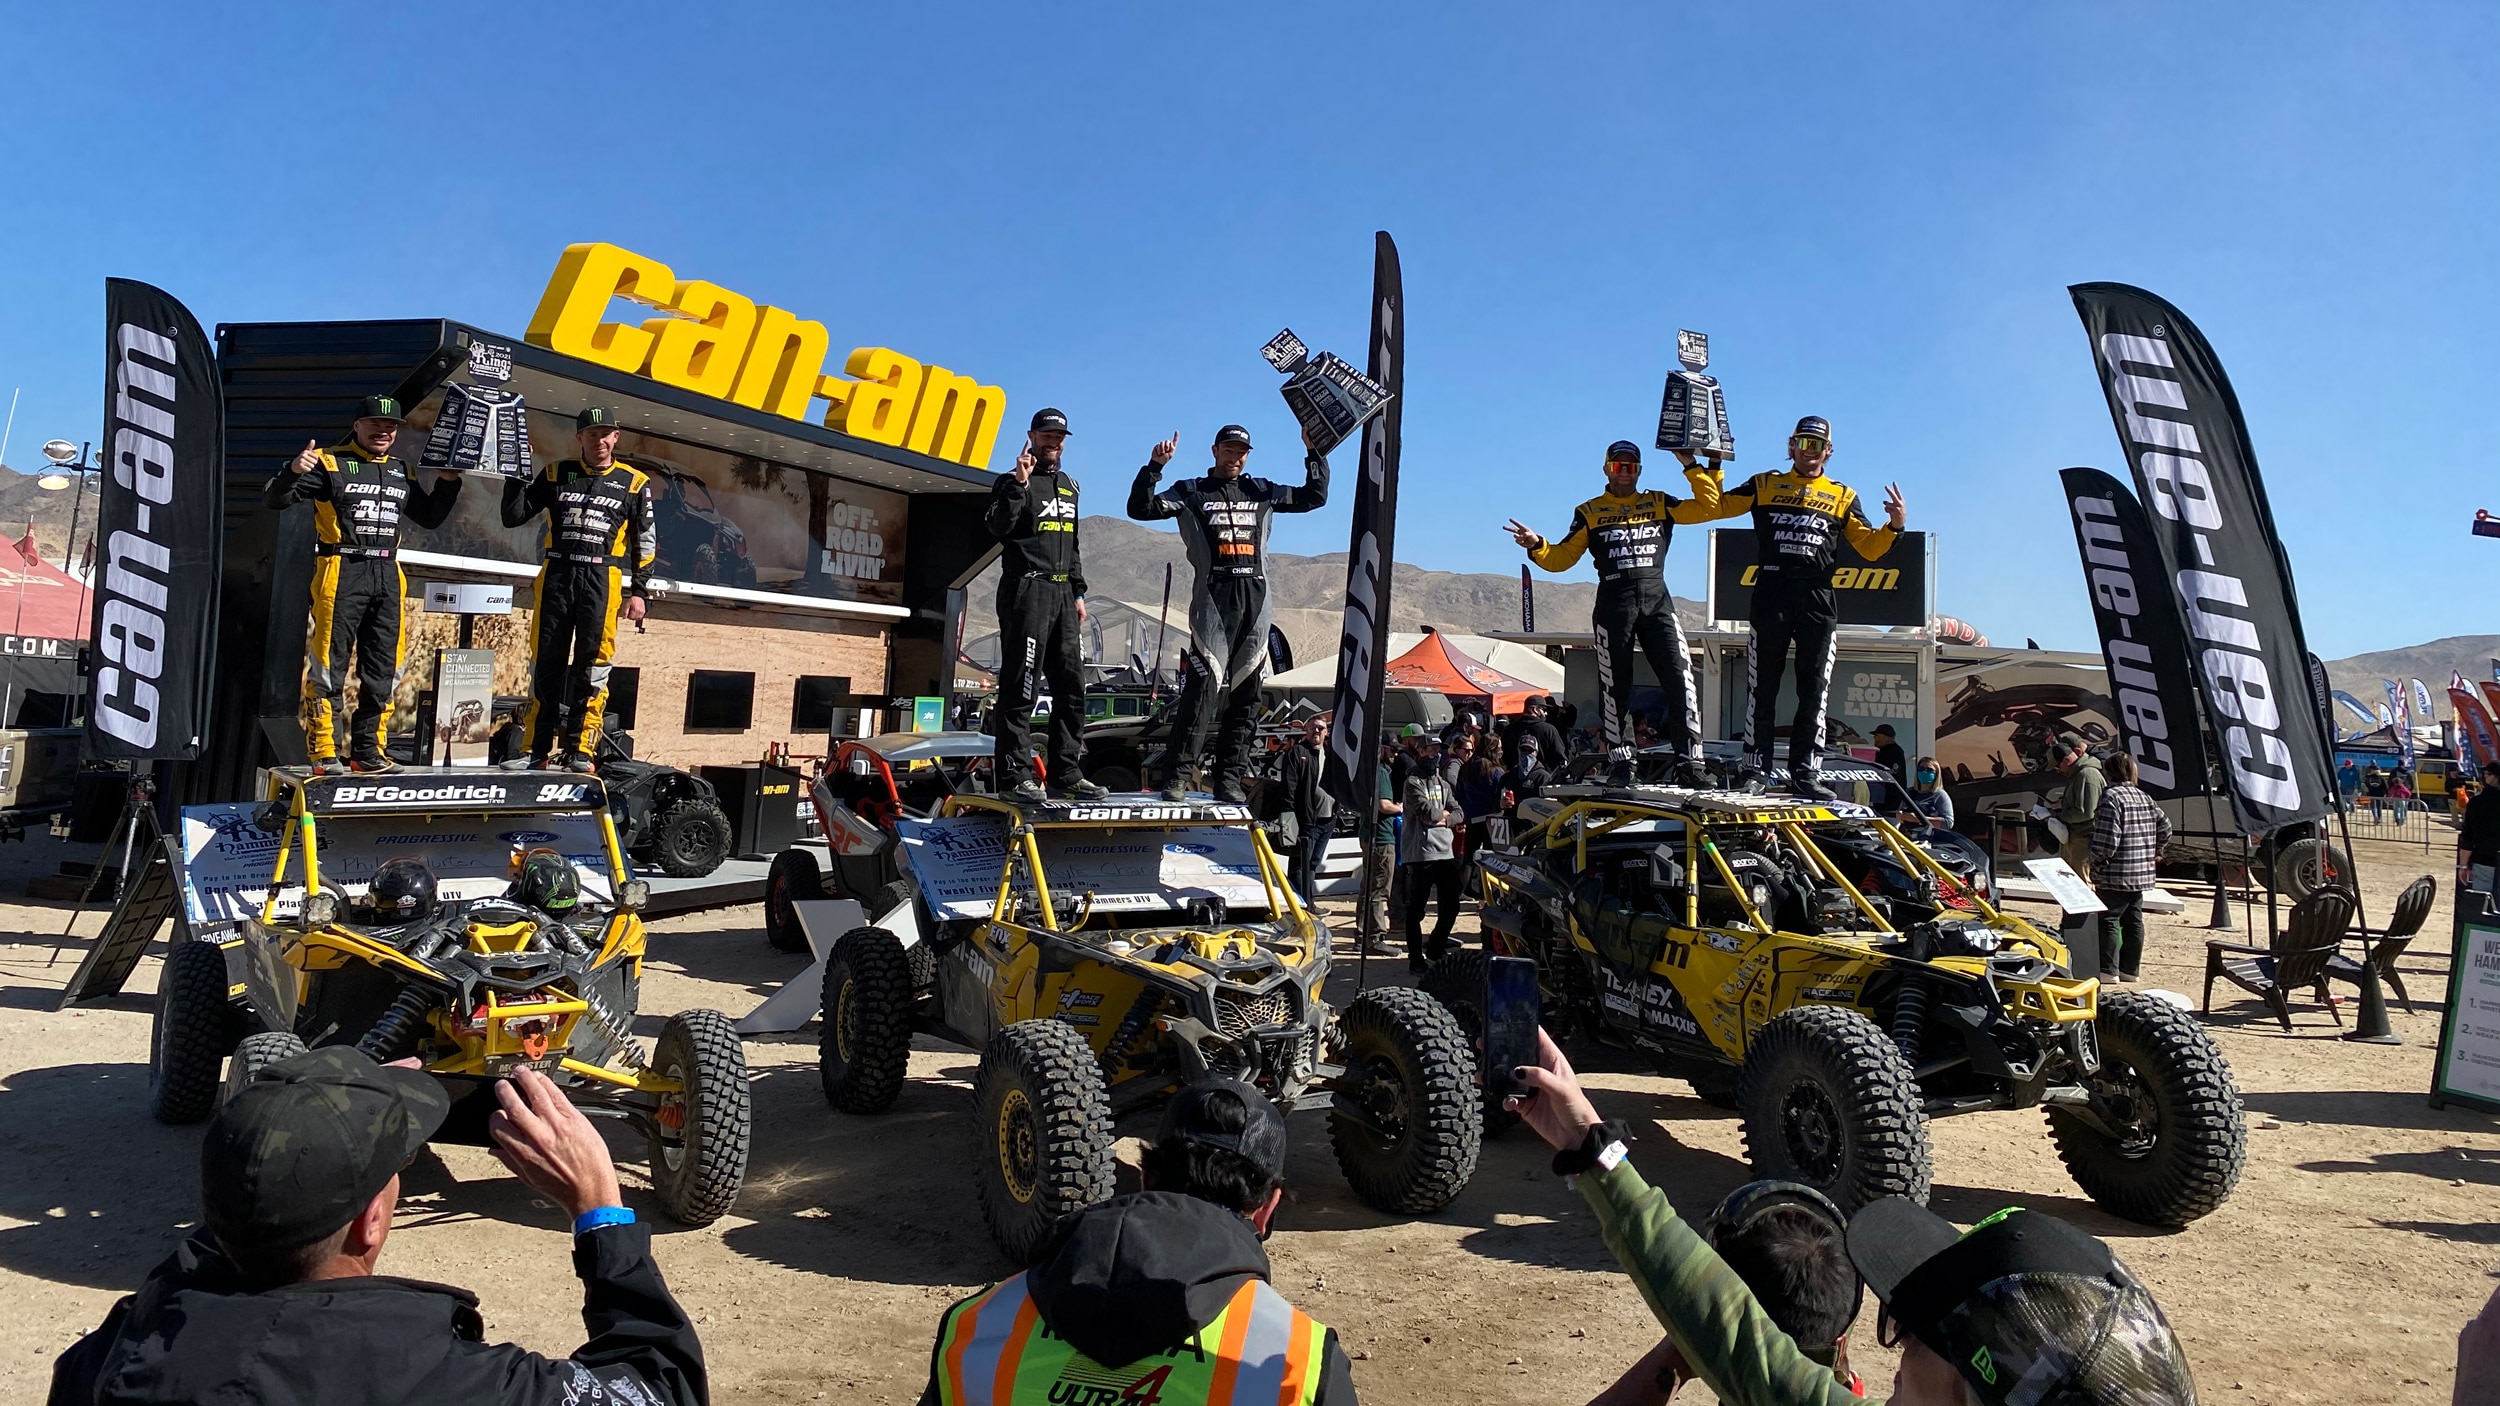 King of the hammers podium